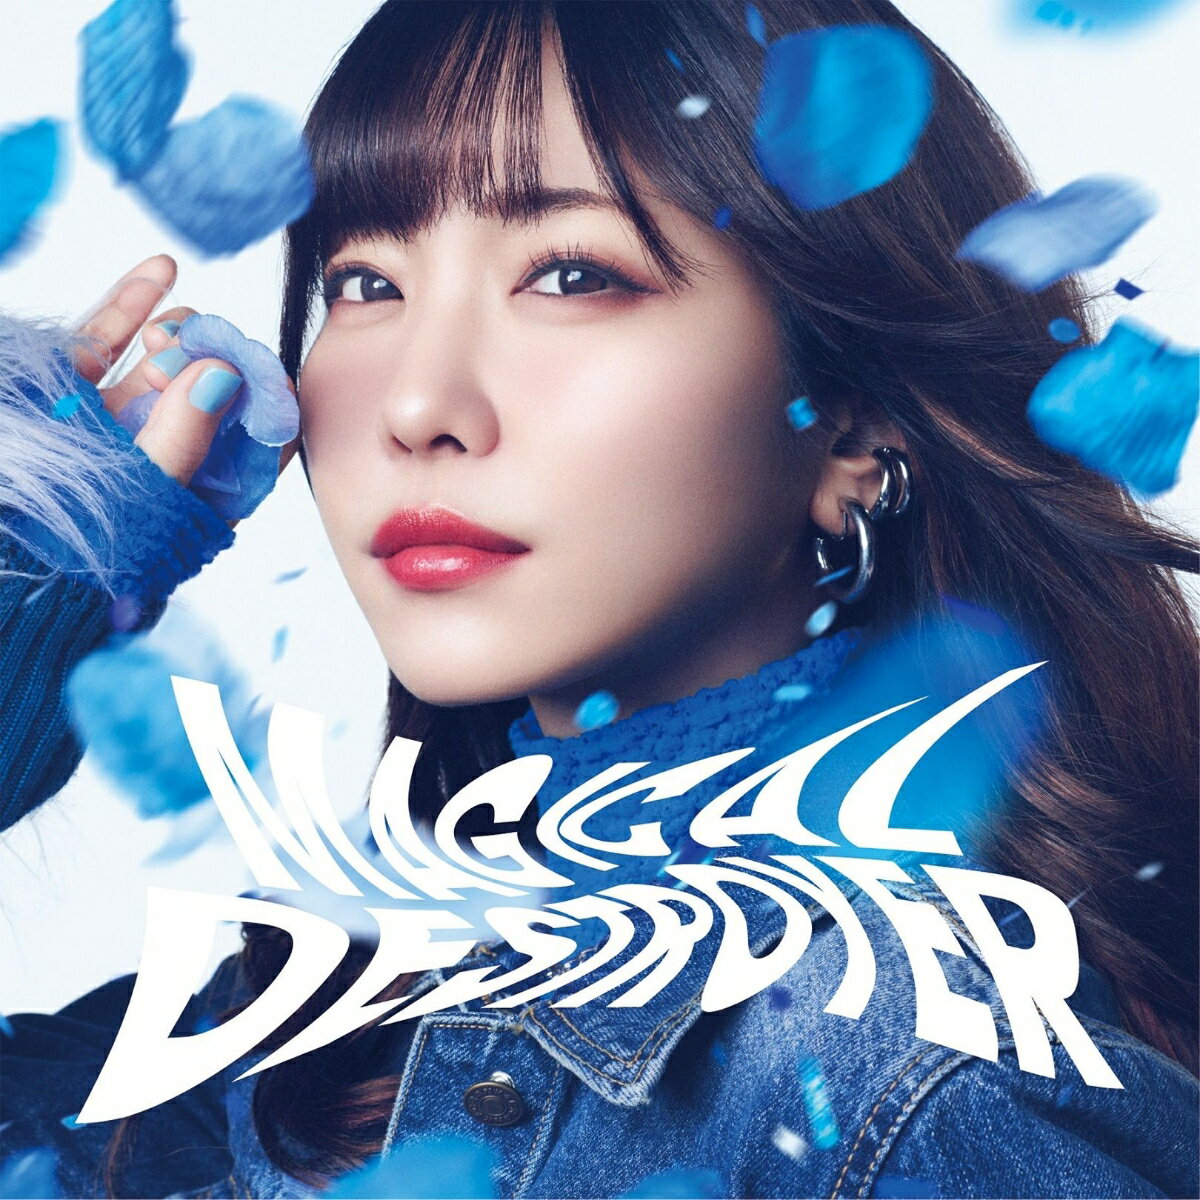 MAGICAL DESTROYER (初回限定盤)